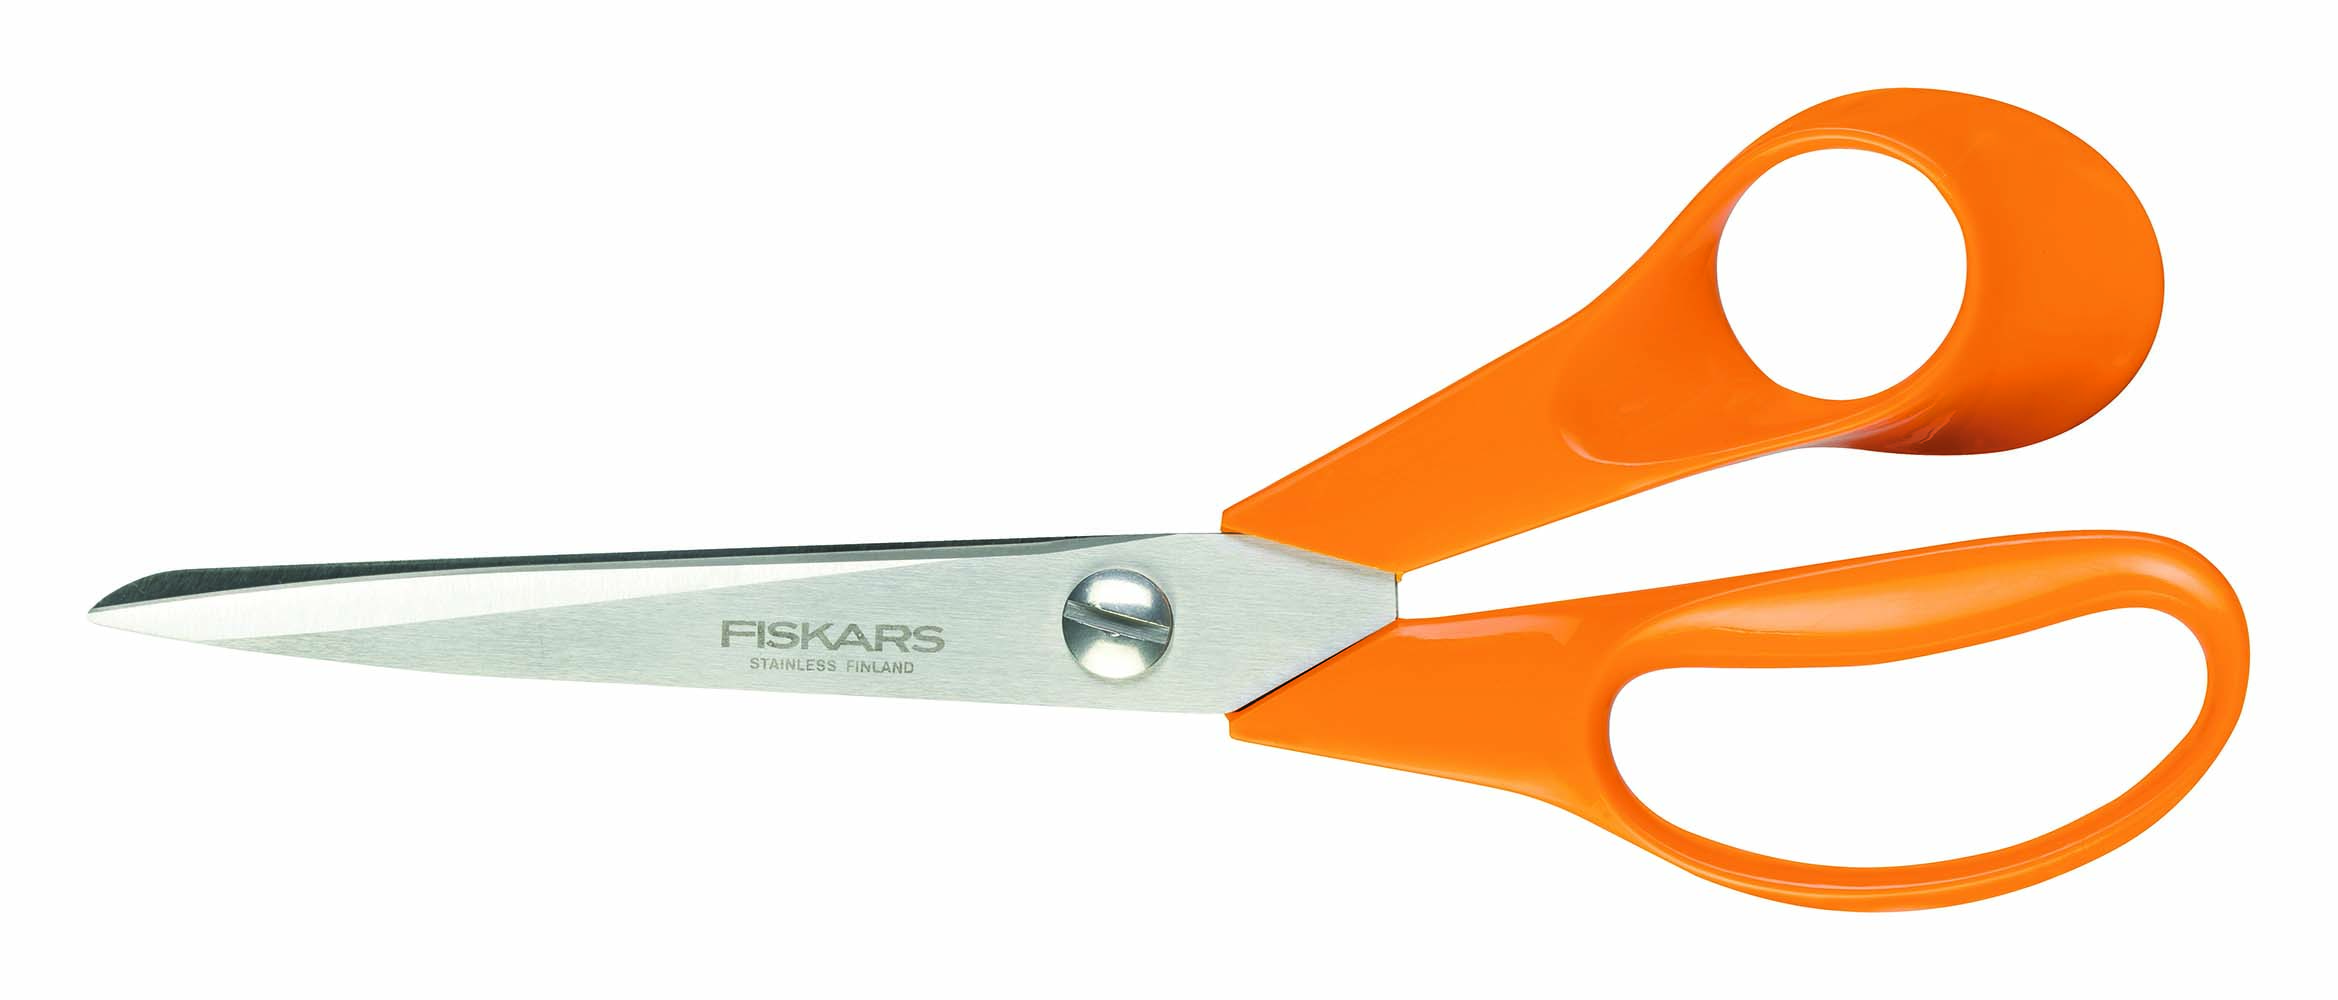 6331080 The classic universal scissor. Extra strong and equipped with ergonomic and comfortable handles.